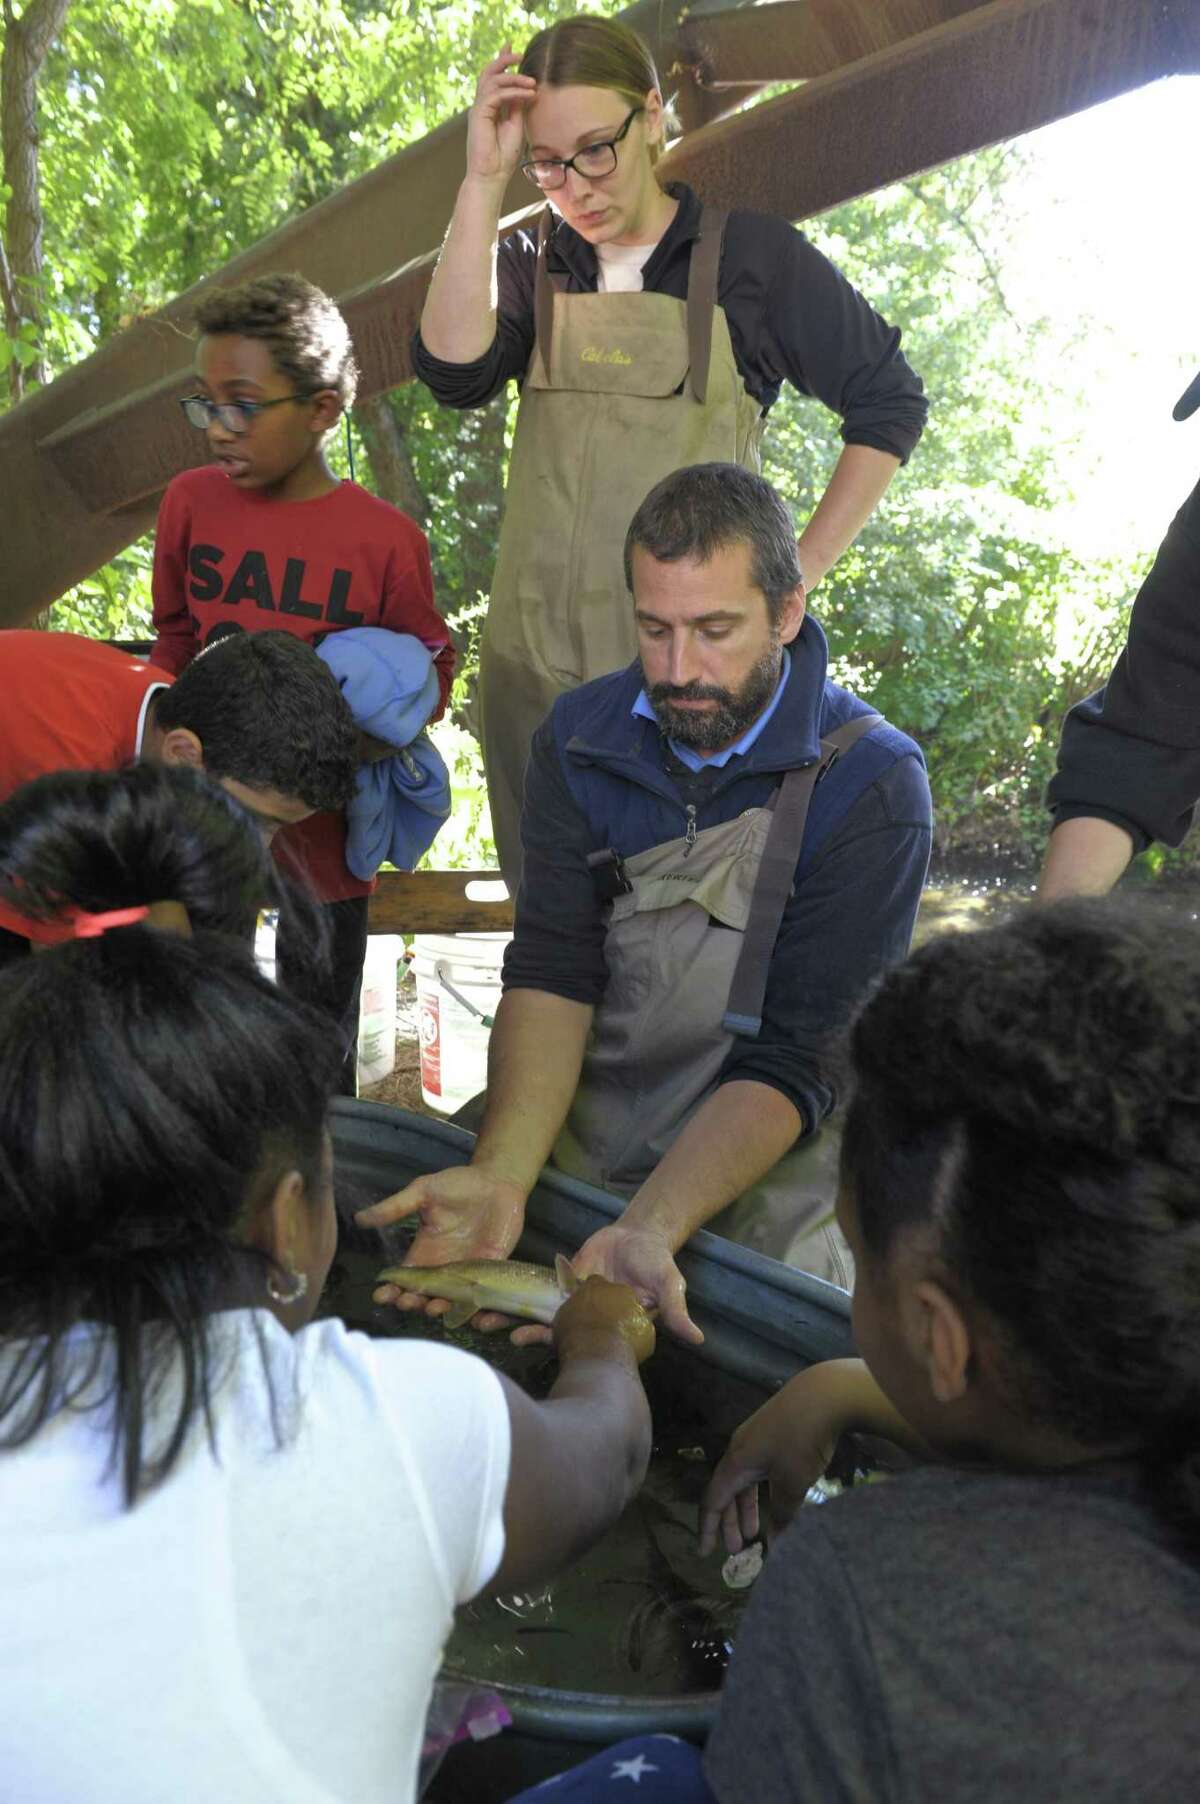 Brian Eltz and Mallory Humphrey, from the DEEP Fish Division, show Pembroke School students fish taken from the Still River during the Housatonic Valley Association (HVA) Still River Day. The event is used to teach Danbury middle and elementary school students about the environment in an outdoor classroom setting next to the Still River. Wednesday, October 4, 2017, in Danbury, Conn.